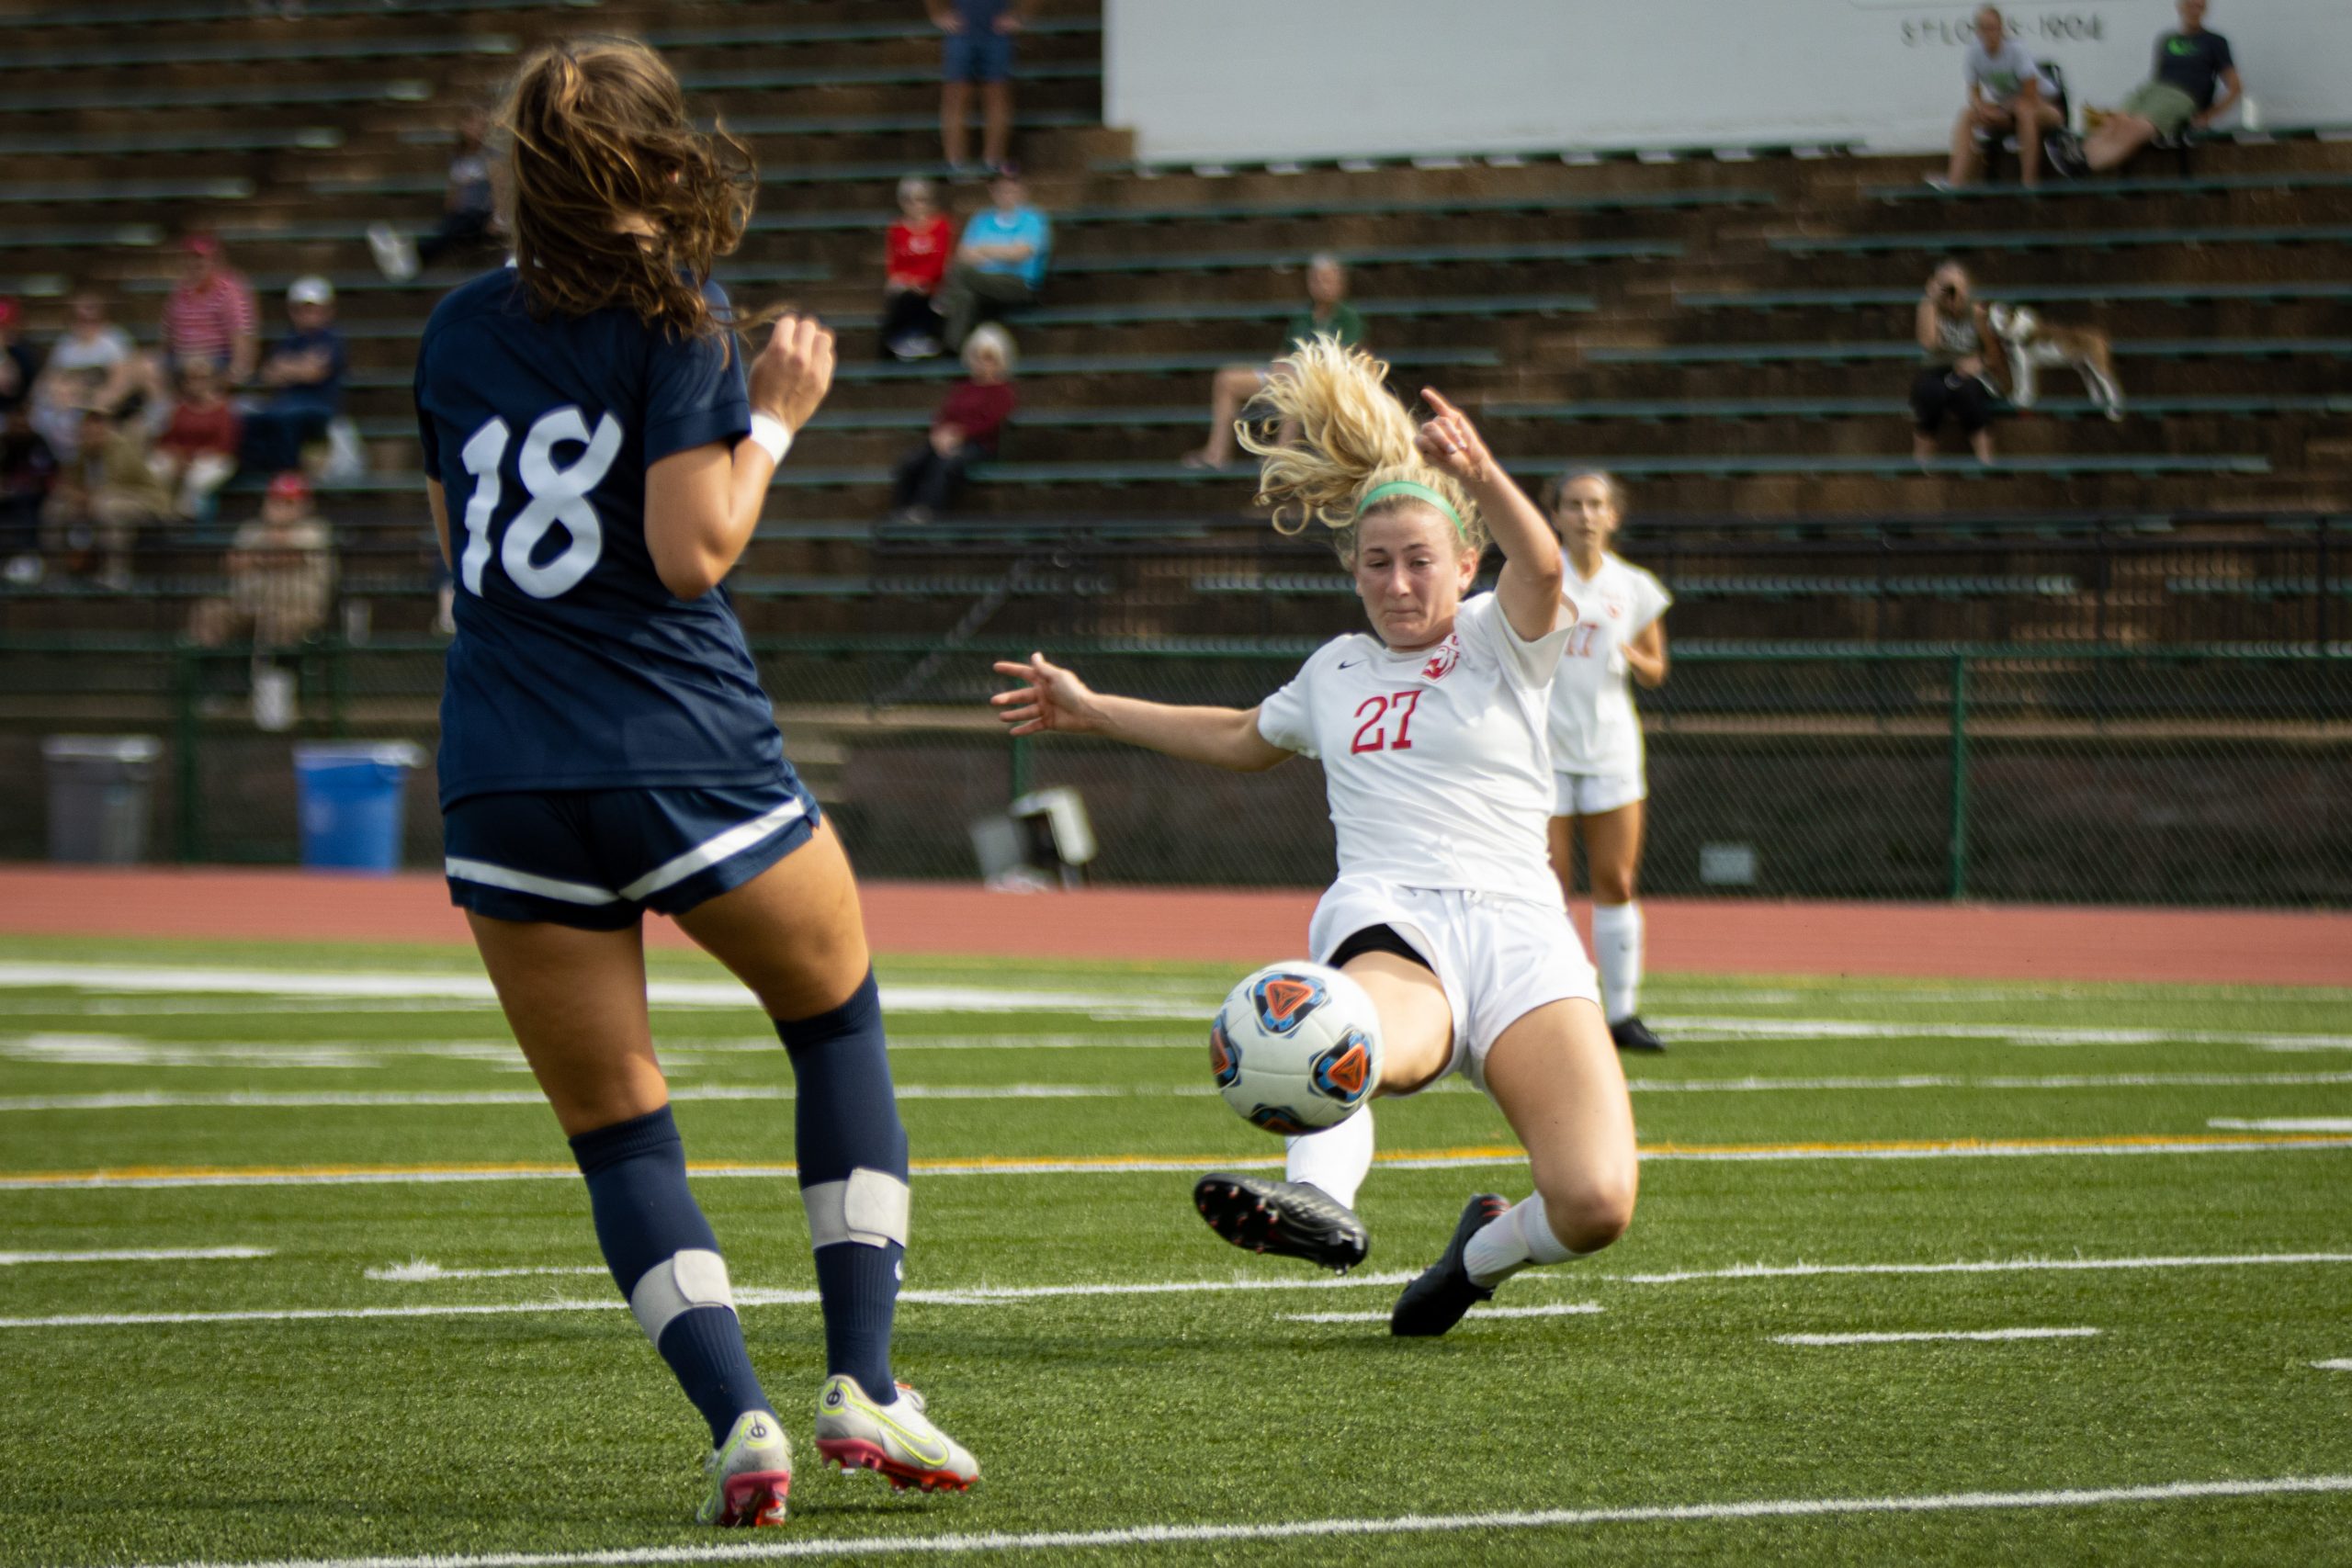 A soccer player in a white jersey extends her right foot to kick a white and red soccer ball. Her left foot curls behind her as she nearly parallels the ground and her blond hair flows above her head. A player in a blue uniform stands on the left side, moving to the left.